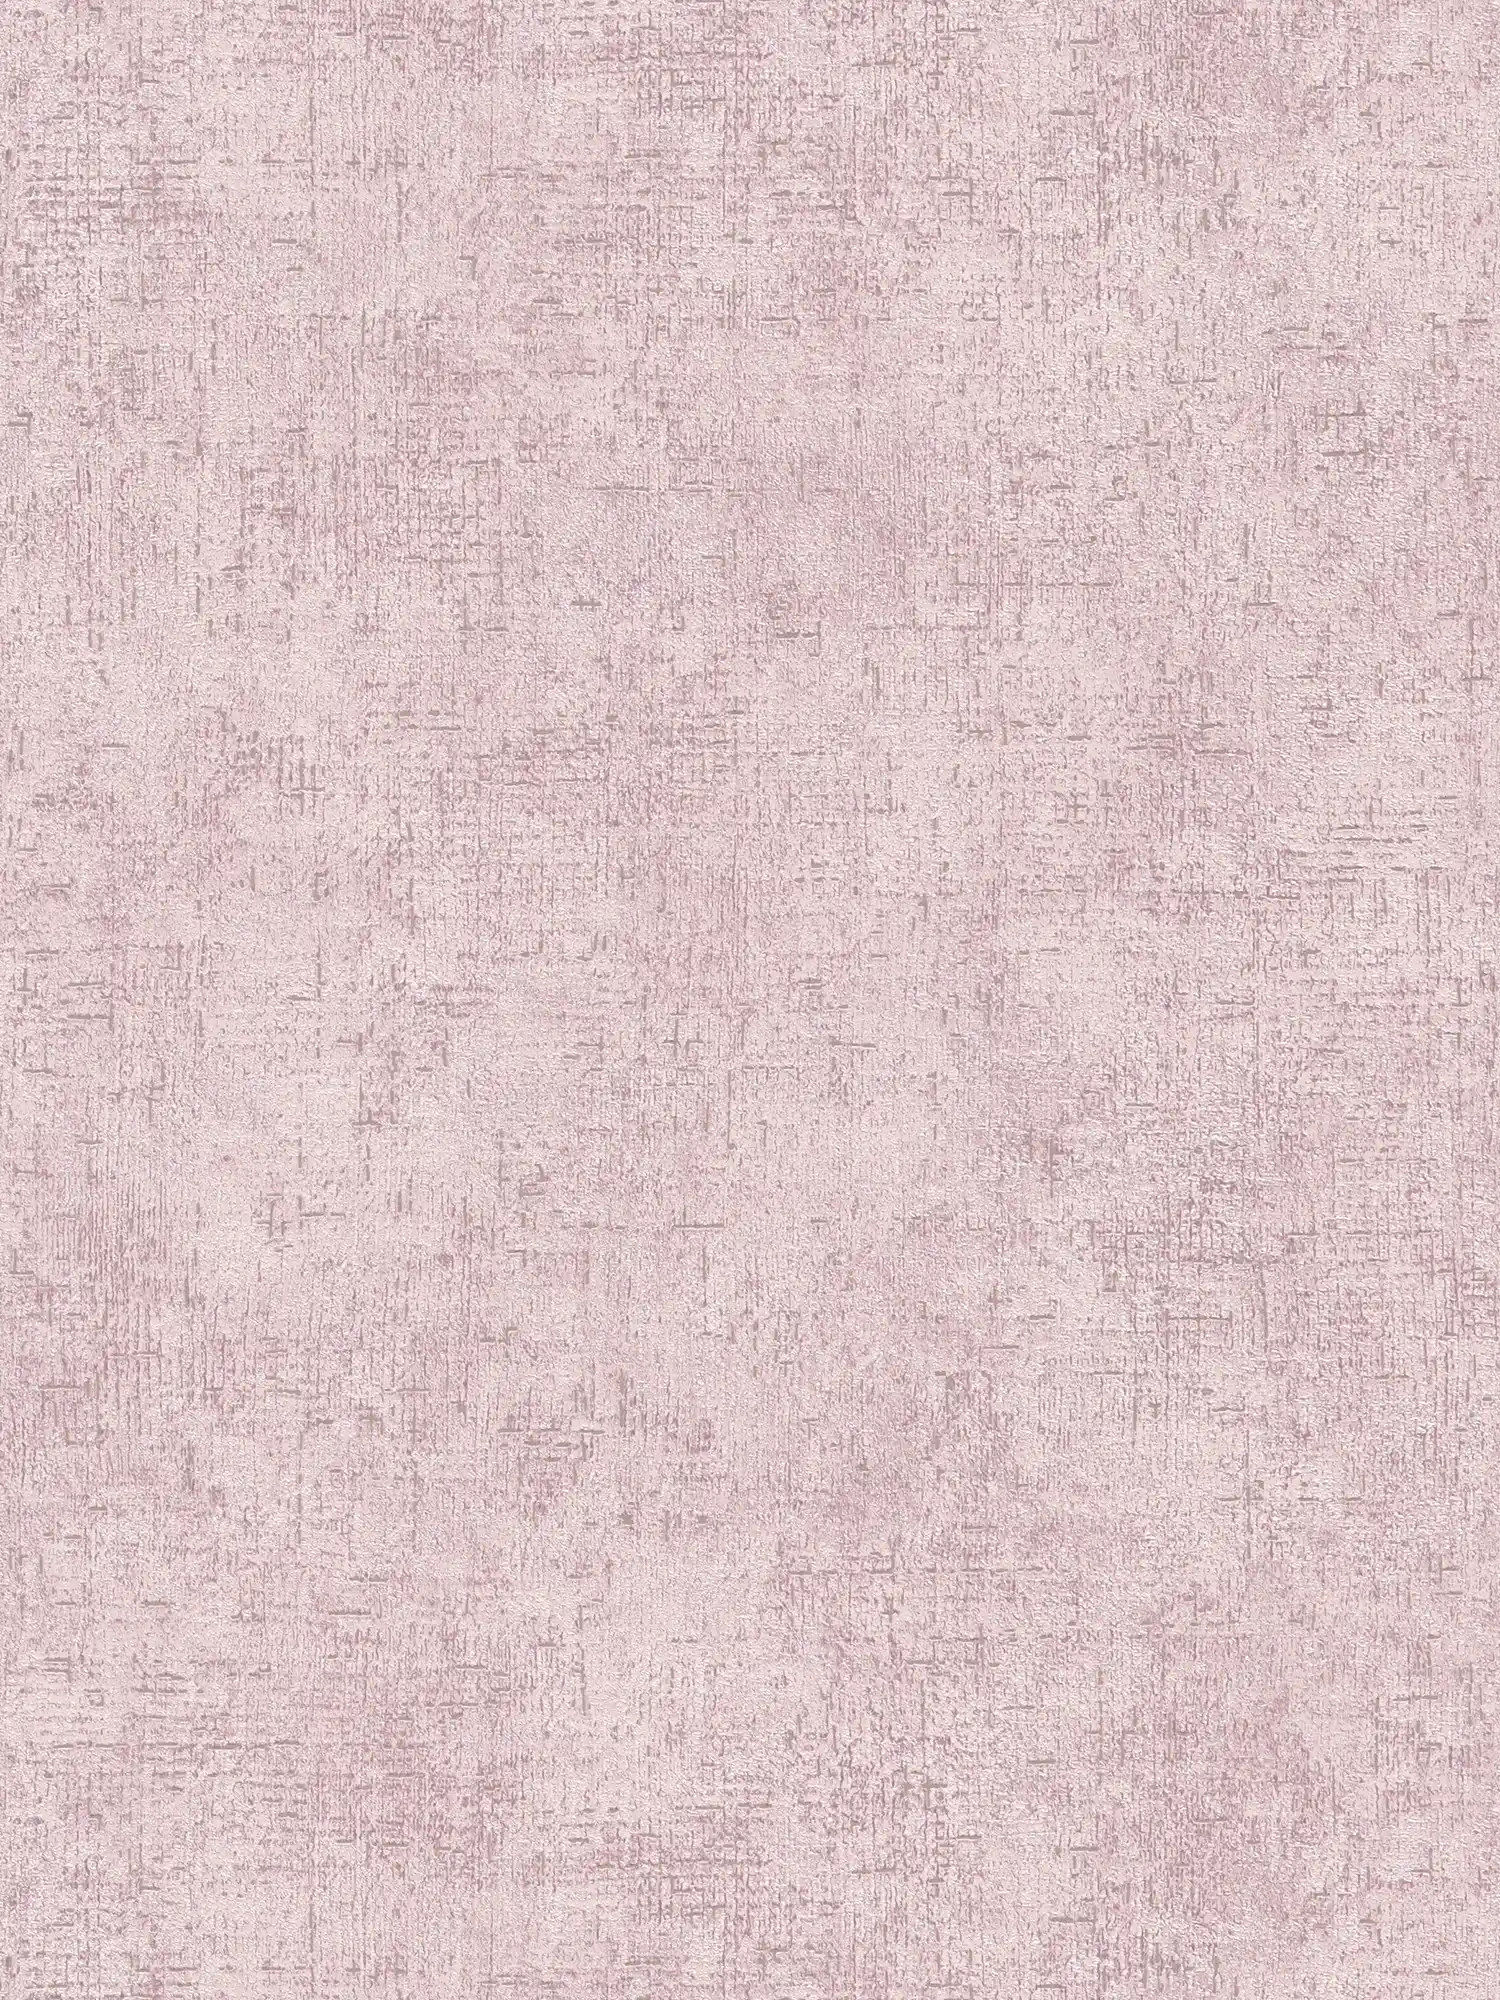 Non-woven wallpaper rustic plaster structure - pink, glossy
